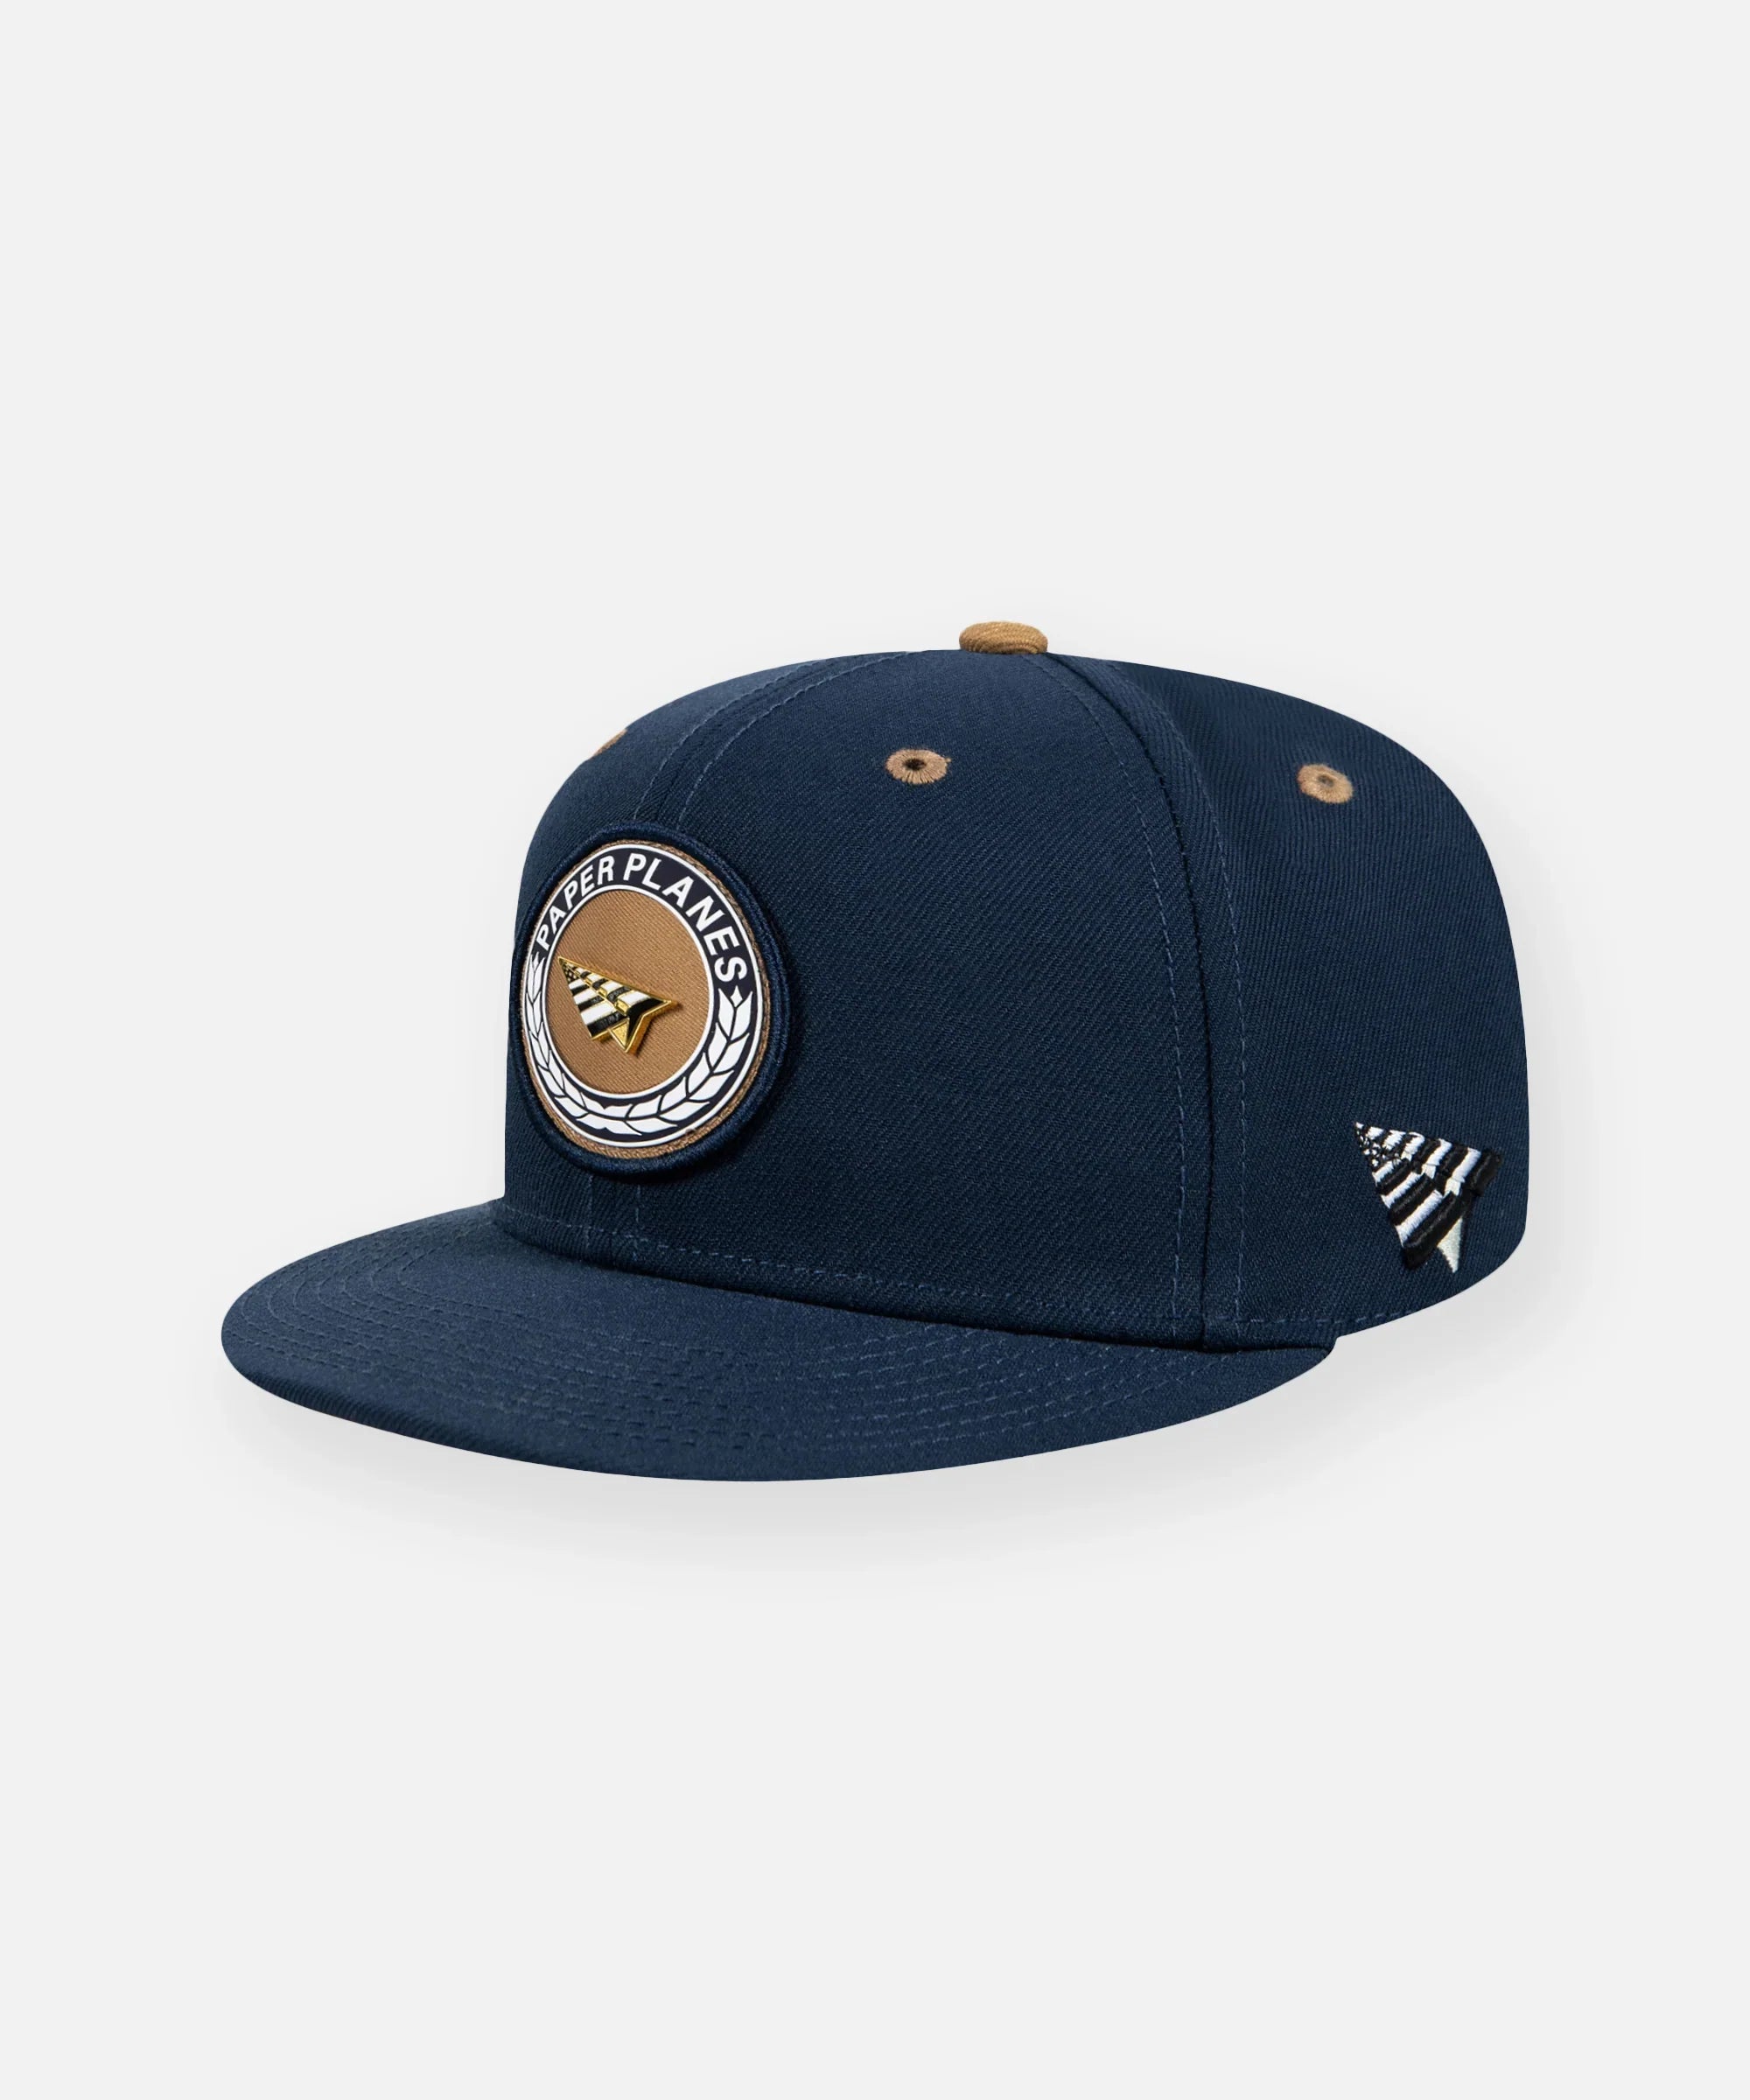 PAPER PLANES FIRST CLASS 2.0 9FIFTY SNAPBACK - Gravity NYC